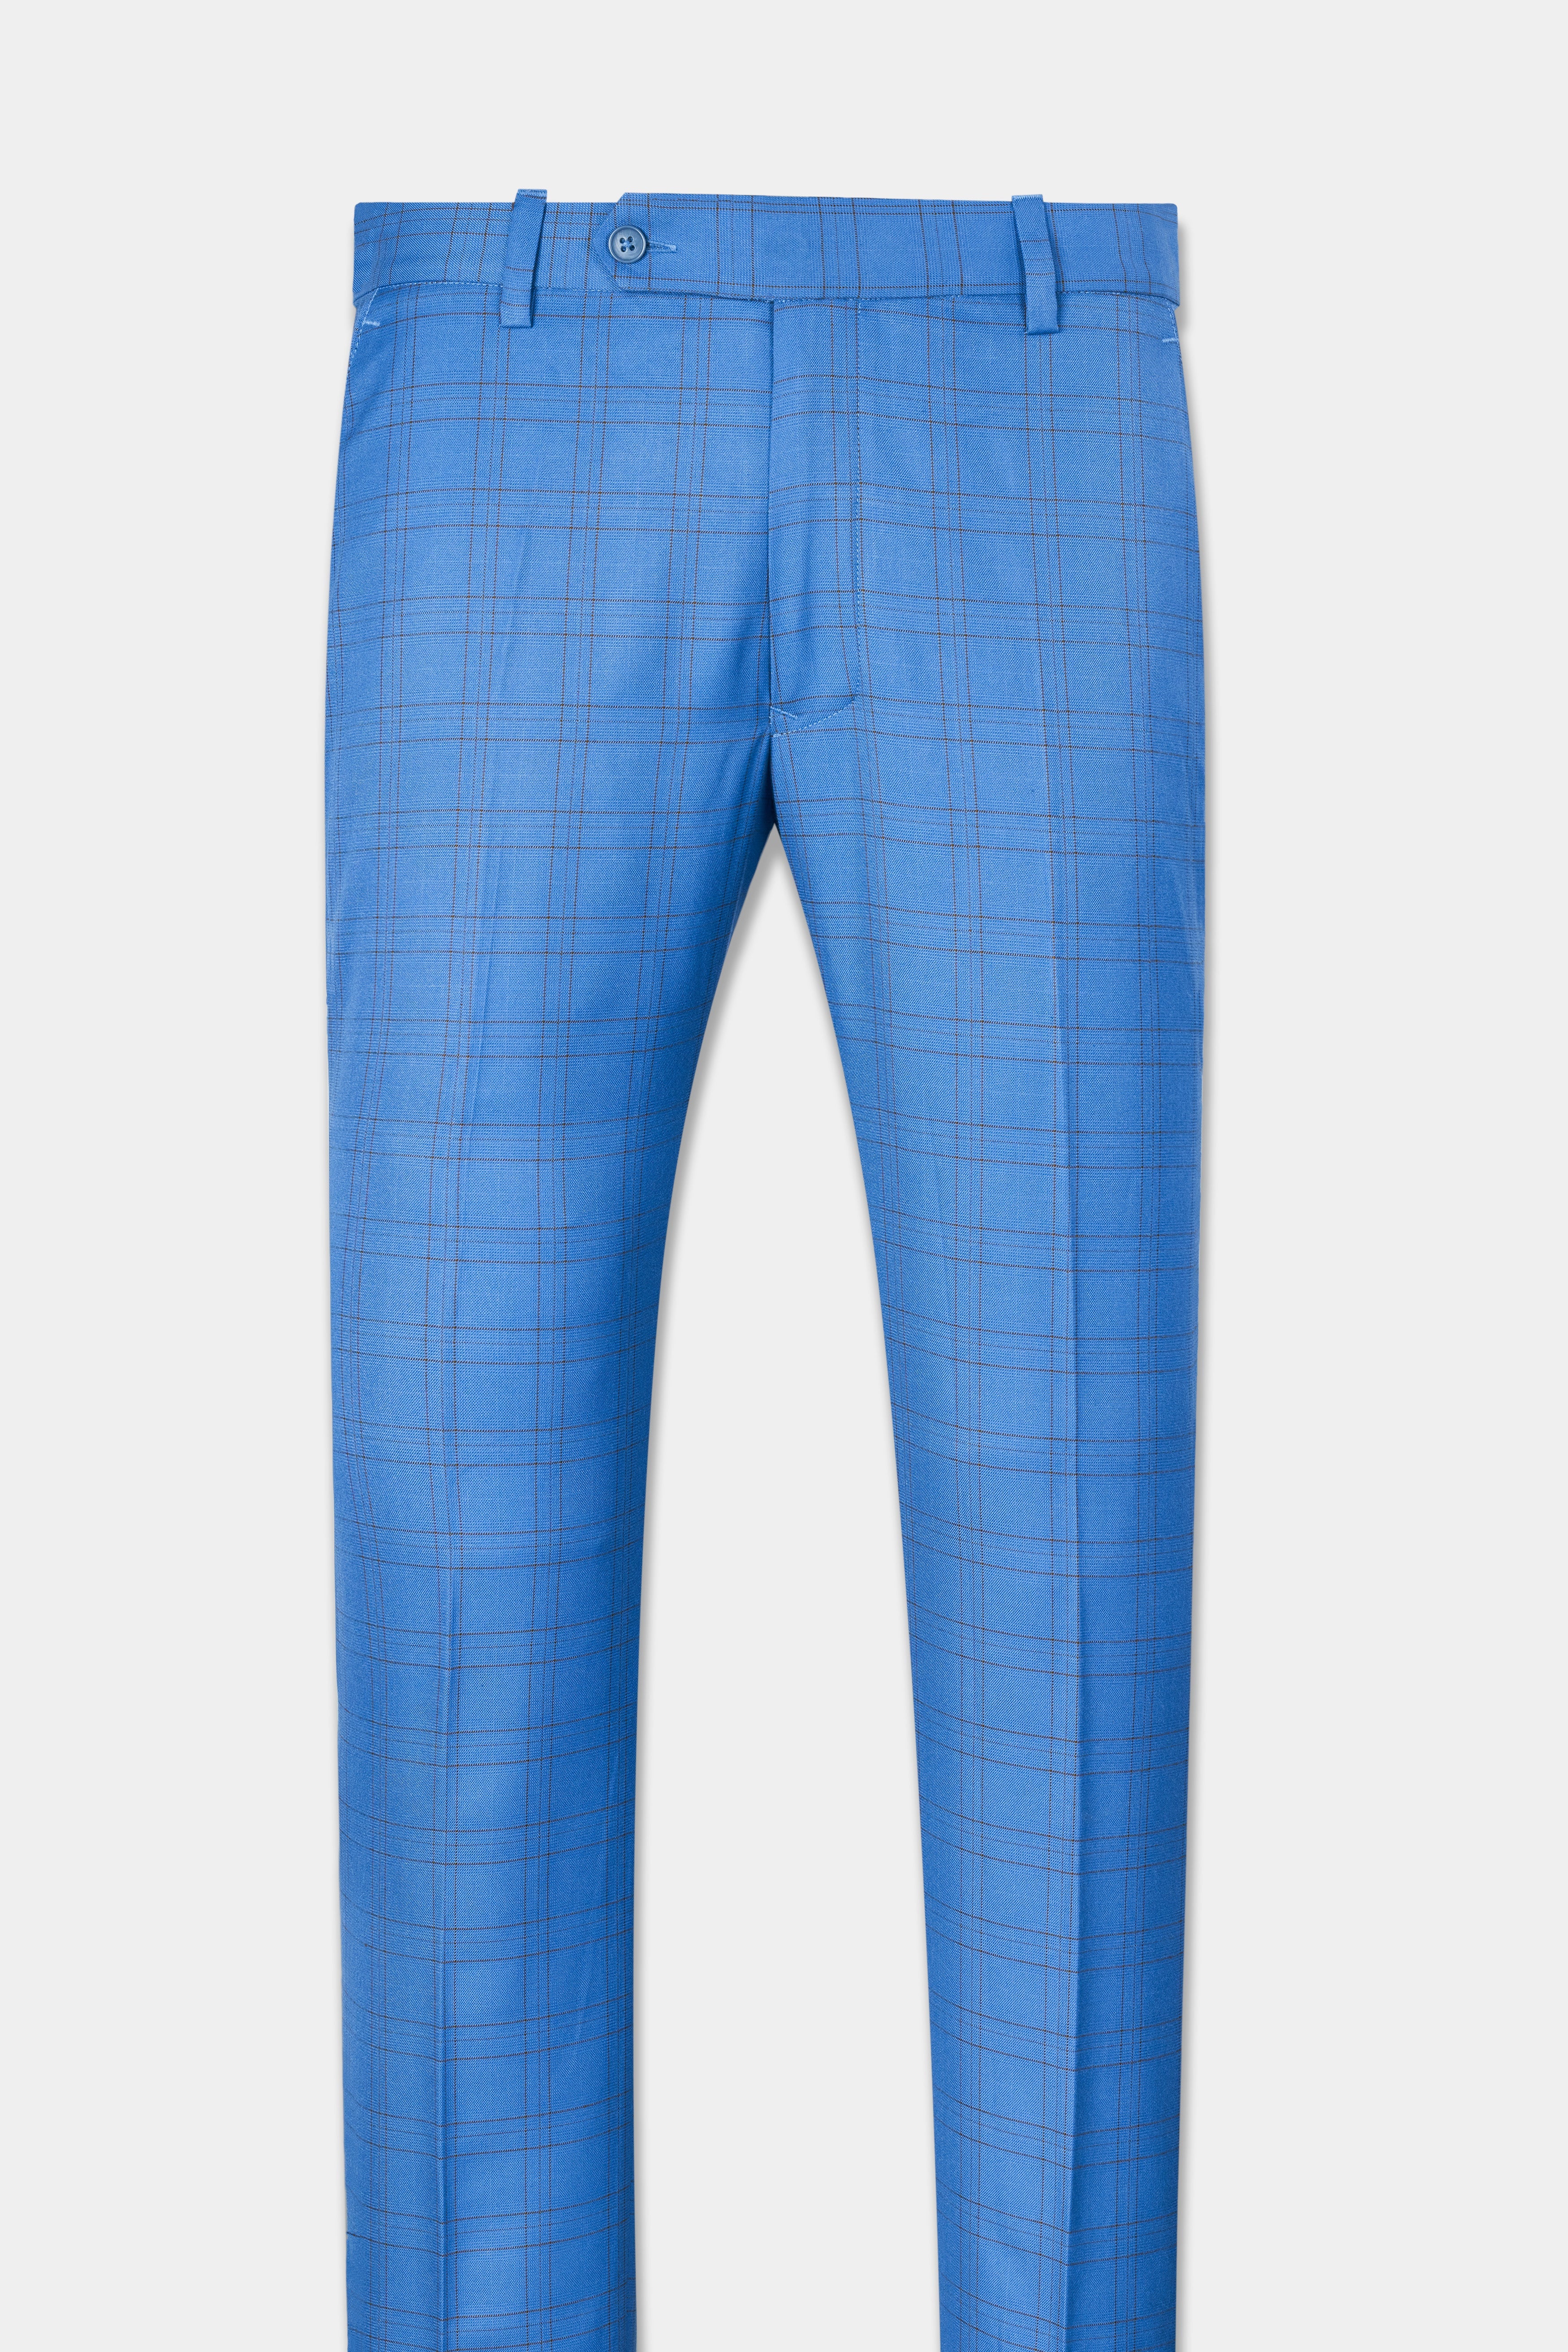 Tufts Blue and Taupe Brown Plaid Wool Rich Bandhgala Designer Suit ST2876-D434-36, ST2876-D434-38, ST2876-D434-40, ST2876-D434-42, ST2876-D434-44, ST2876-D434-46, ST2876-D434-48, ST2876-D434-50, ST2876-D434-52, ST2876-D434-54, ST2876-D434-56, ST2876-D434-58, ST2876-D434-60